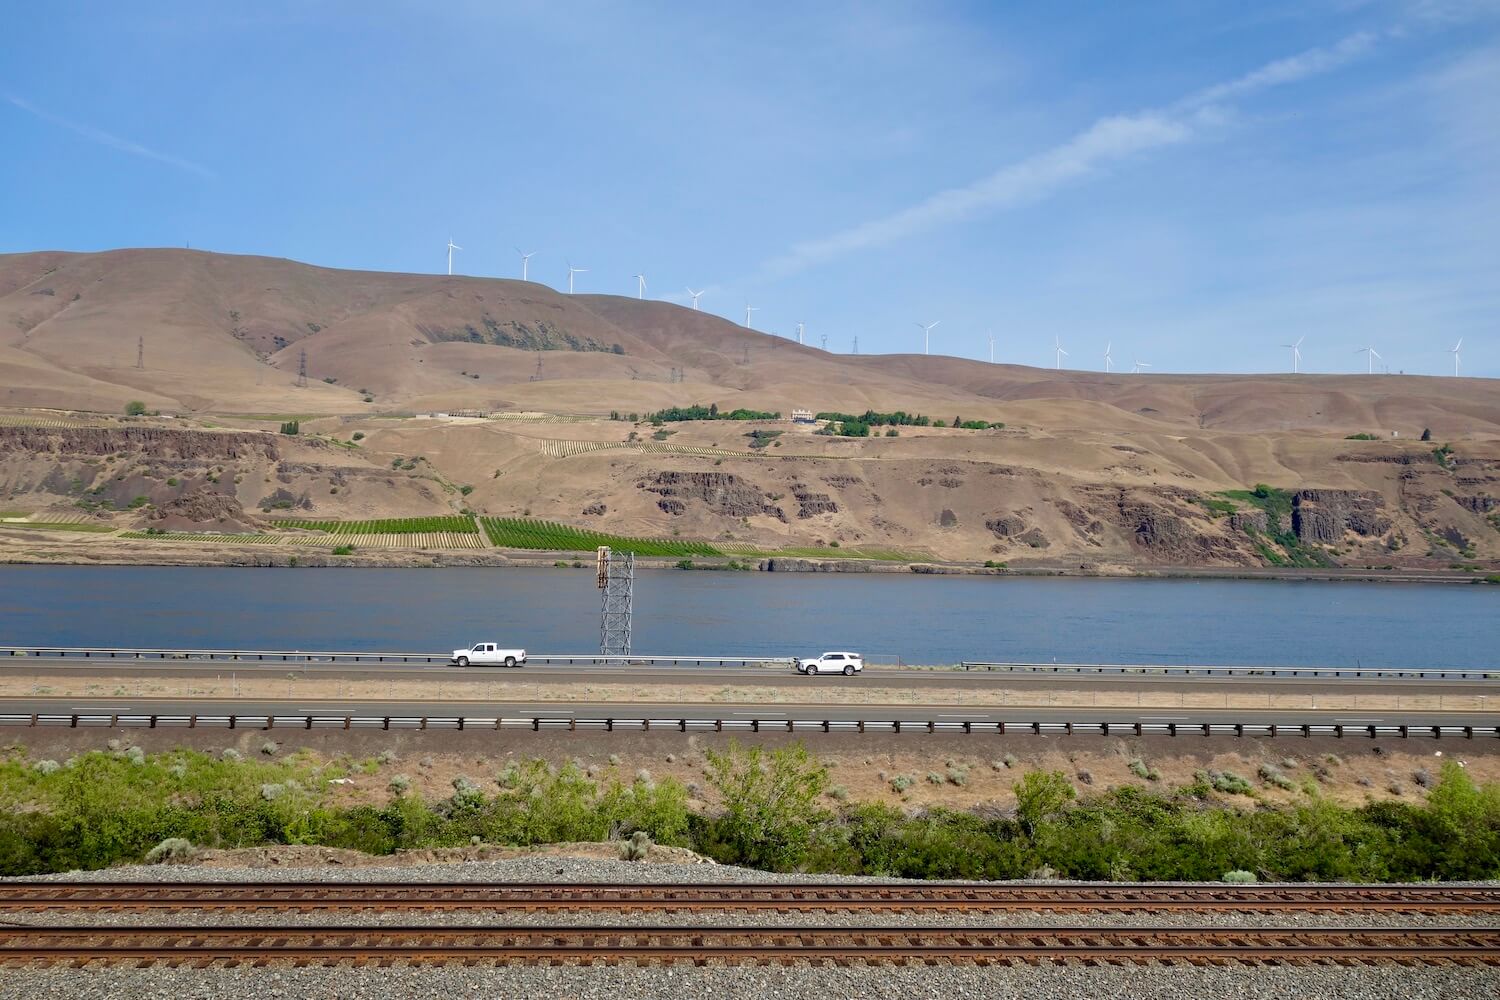 This shot of the Columbia River flowing through the Columbia River Gorge shows rusted train tacks, an interstate highway with two white cars driving and the mighty river.  The hills in the background are brownish colors under a blue sky. 